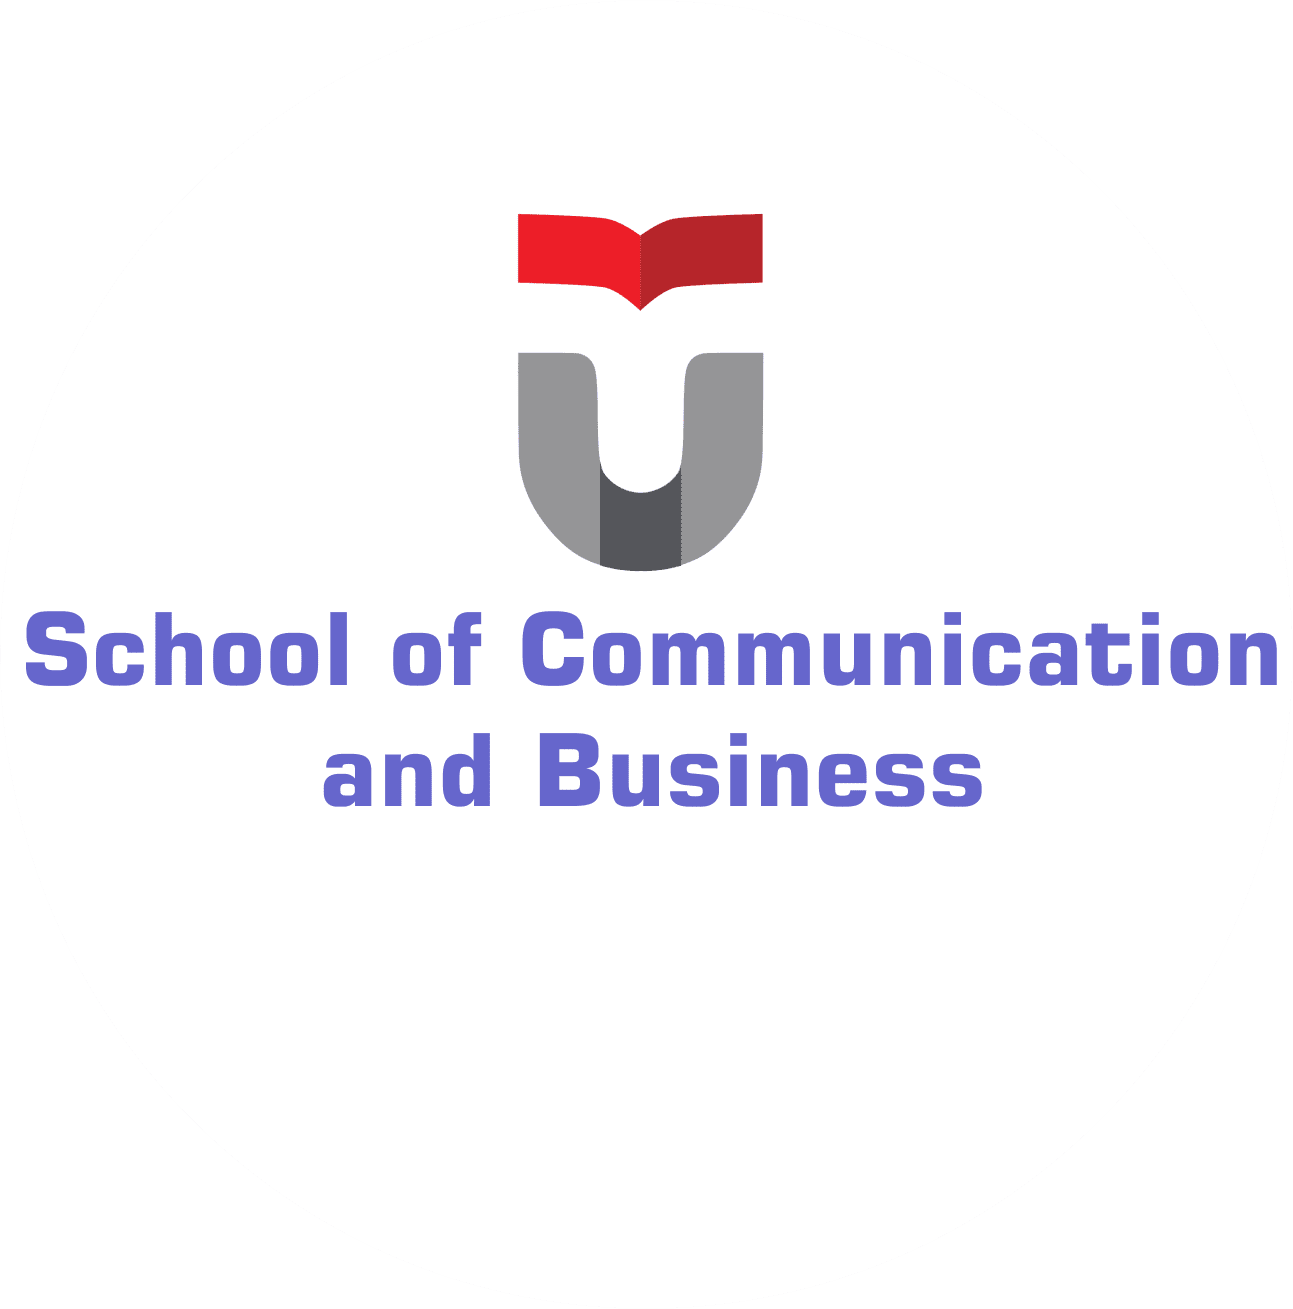 School of Communication and Business